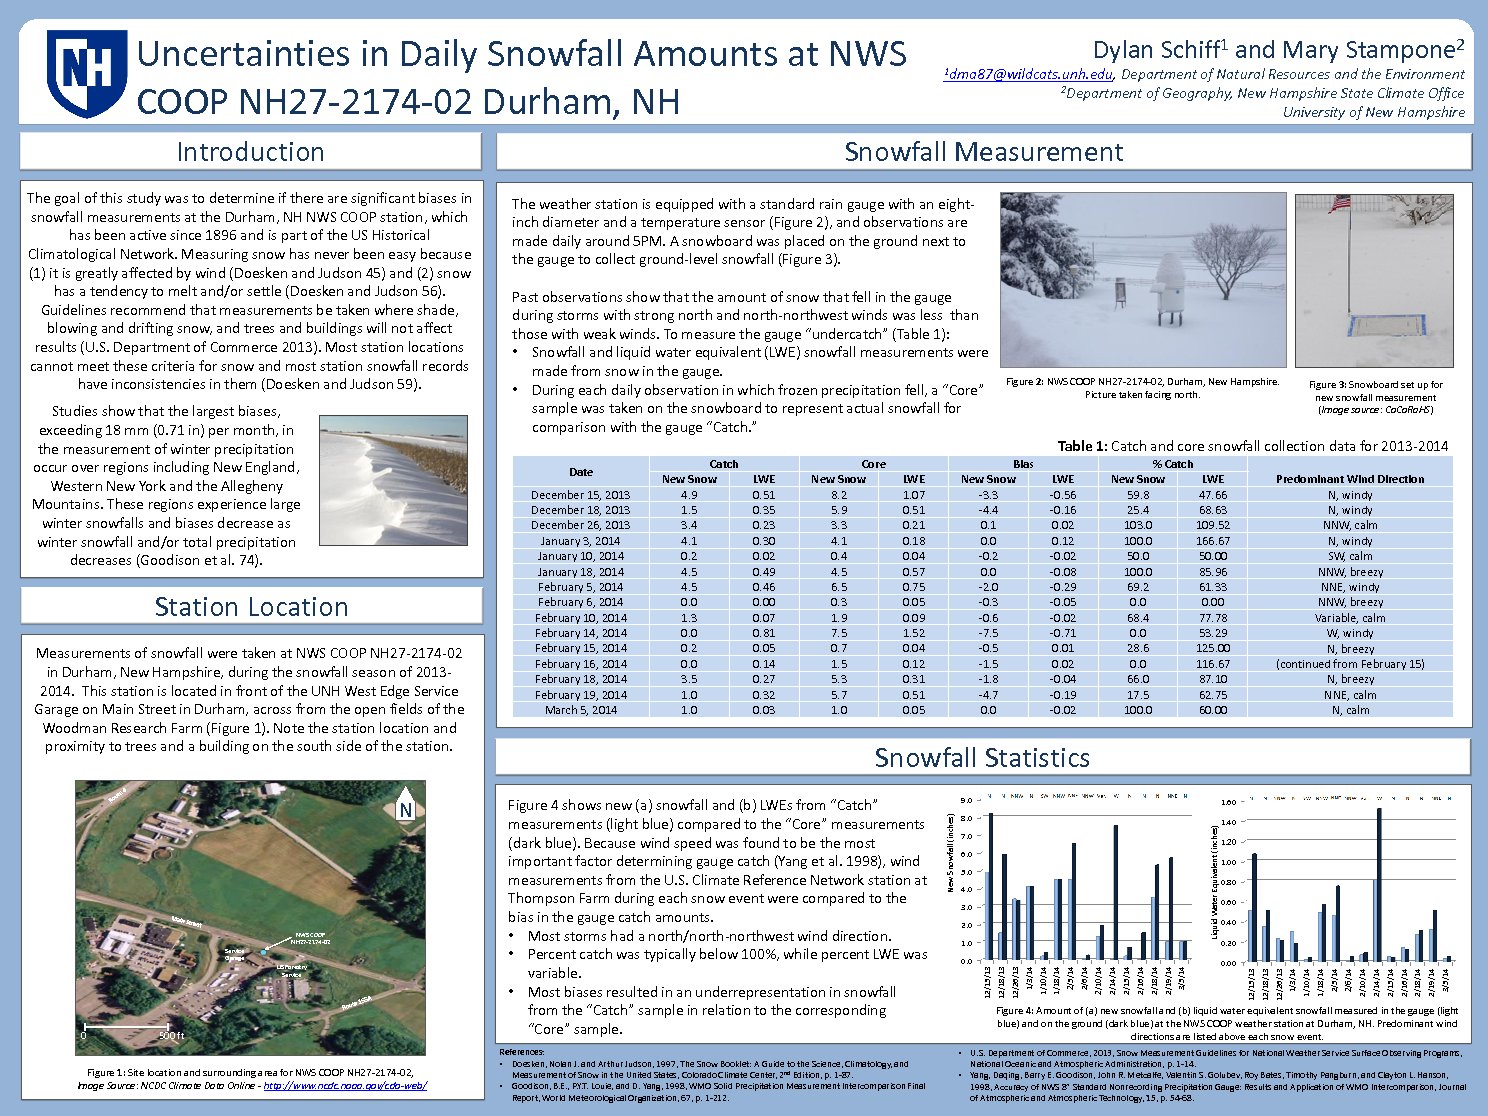 Uncertainties In Daily Snowfall Amounts At Nws Coop Nh27-2174-02 Durham, Nh  by mdb48